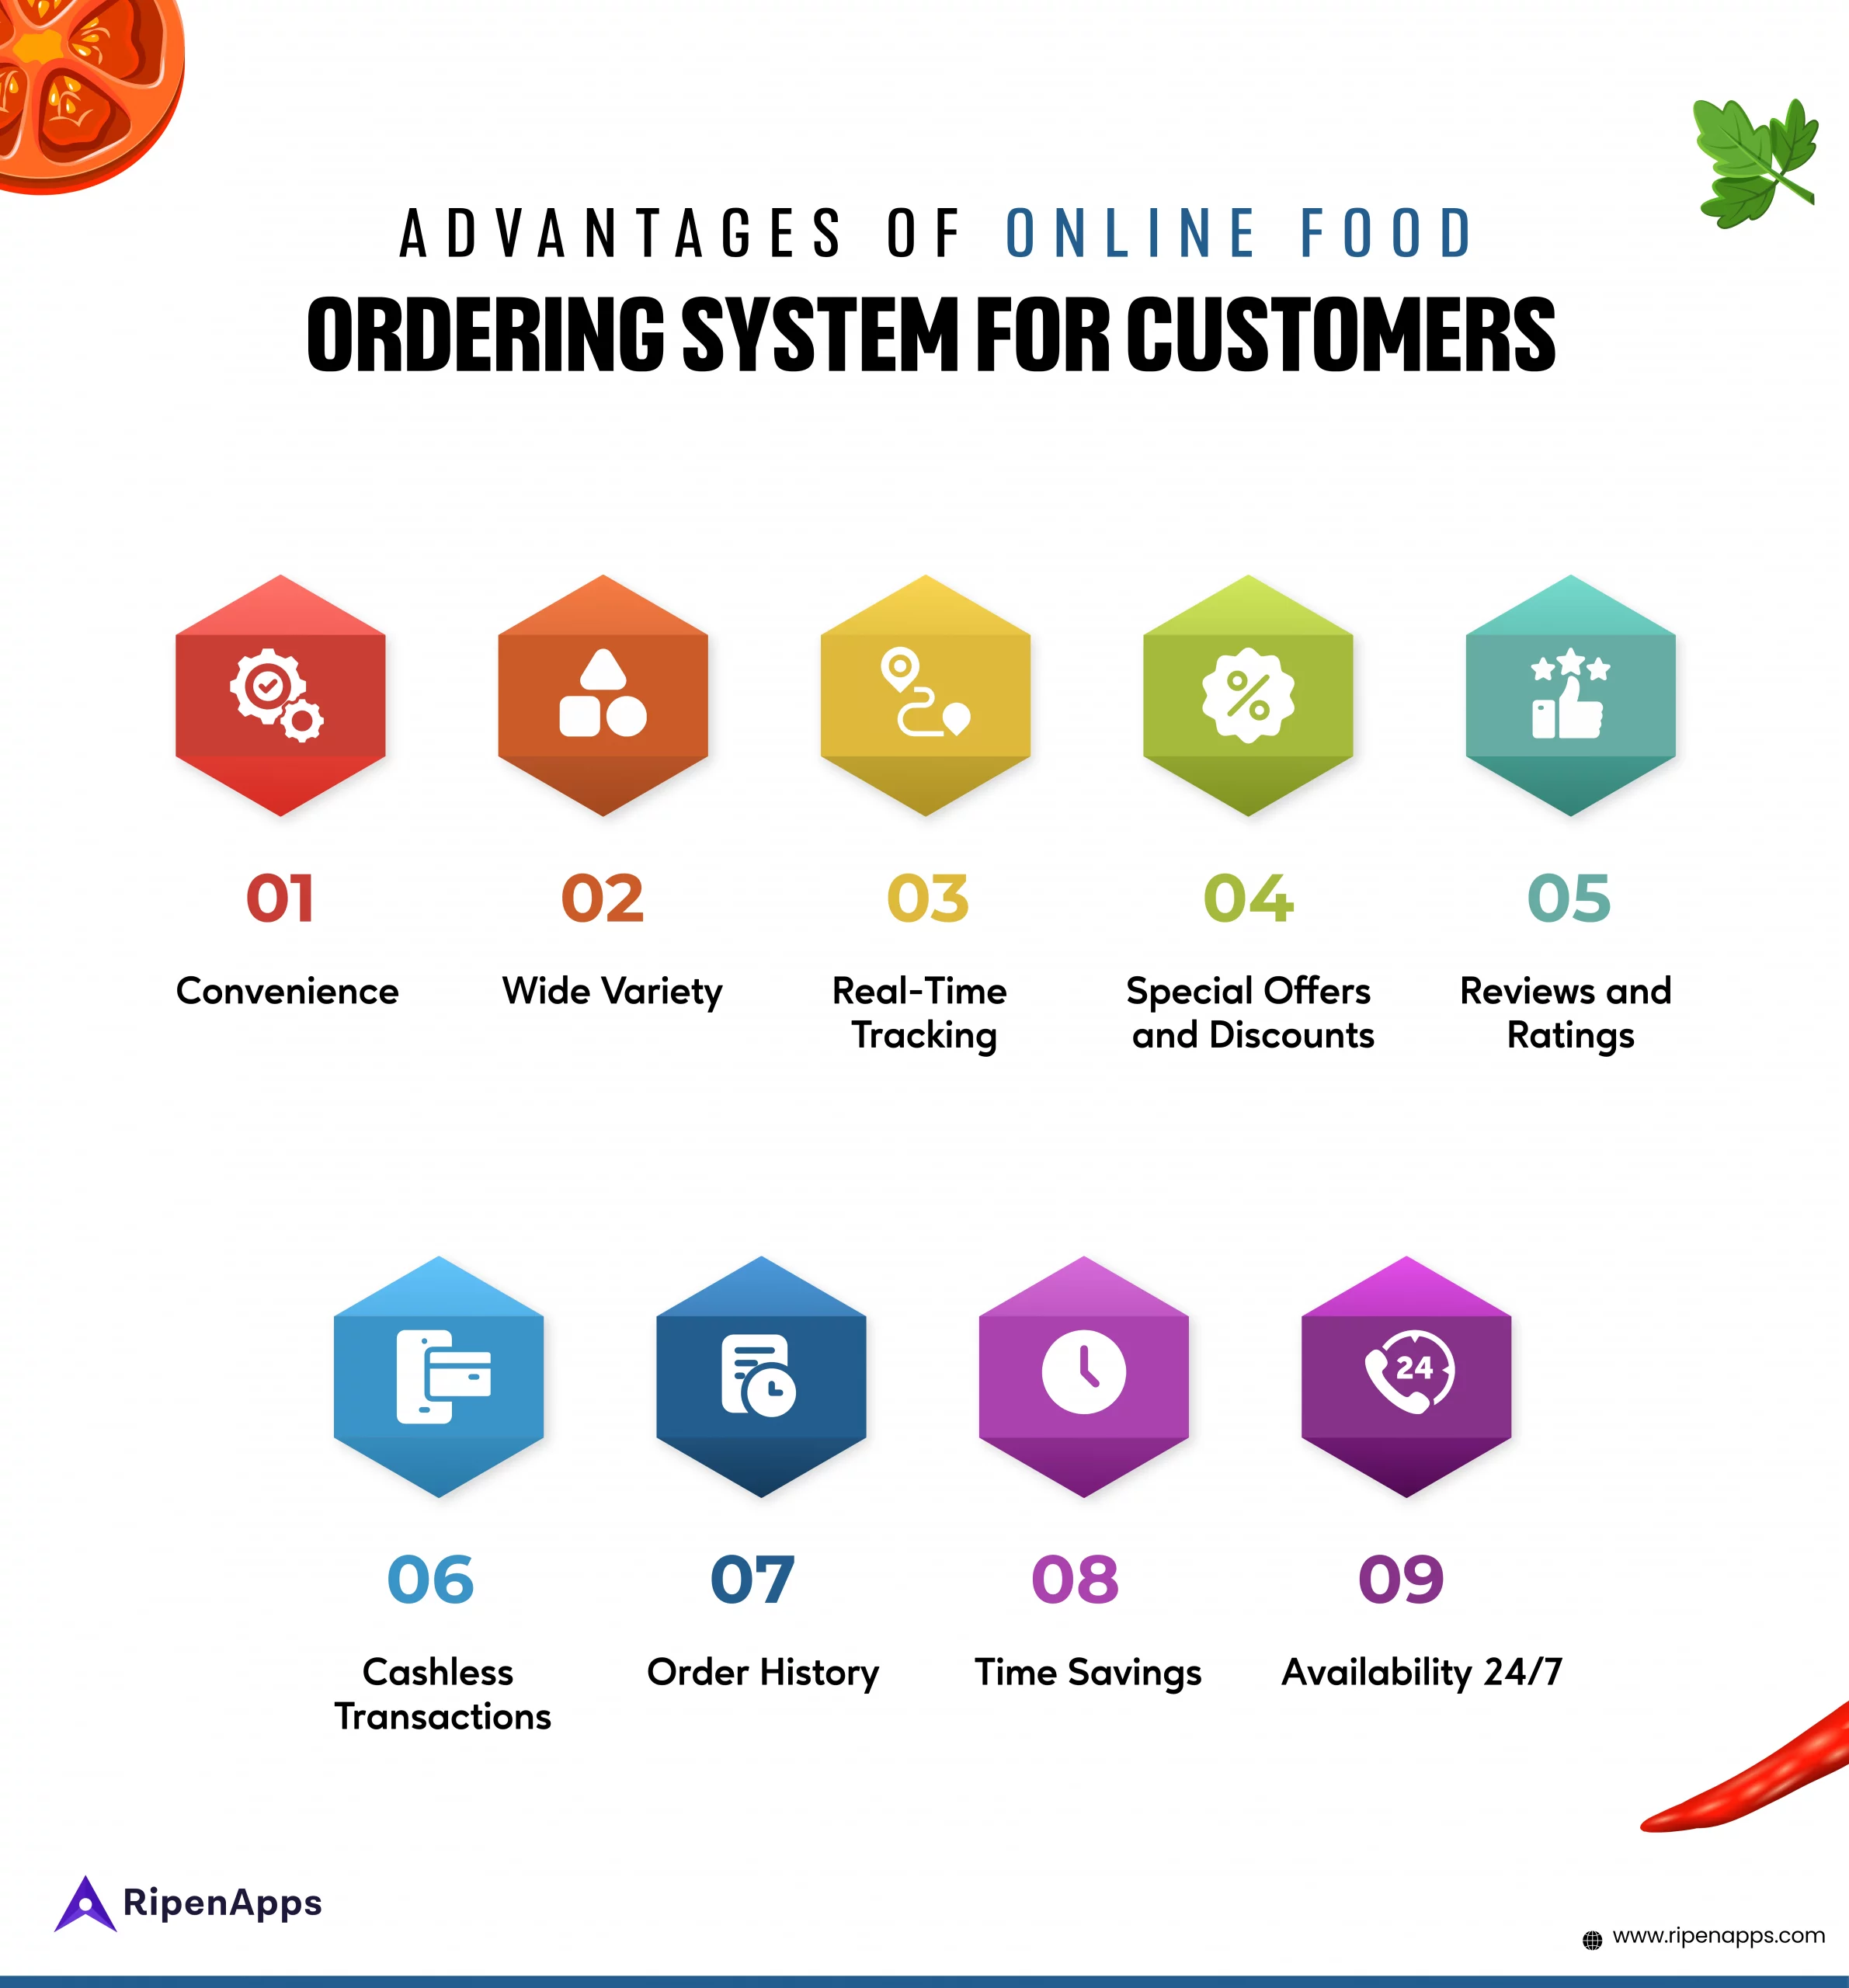 Advantages of Online Food Ordering System for Customers